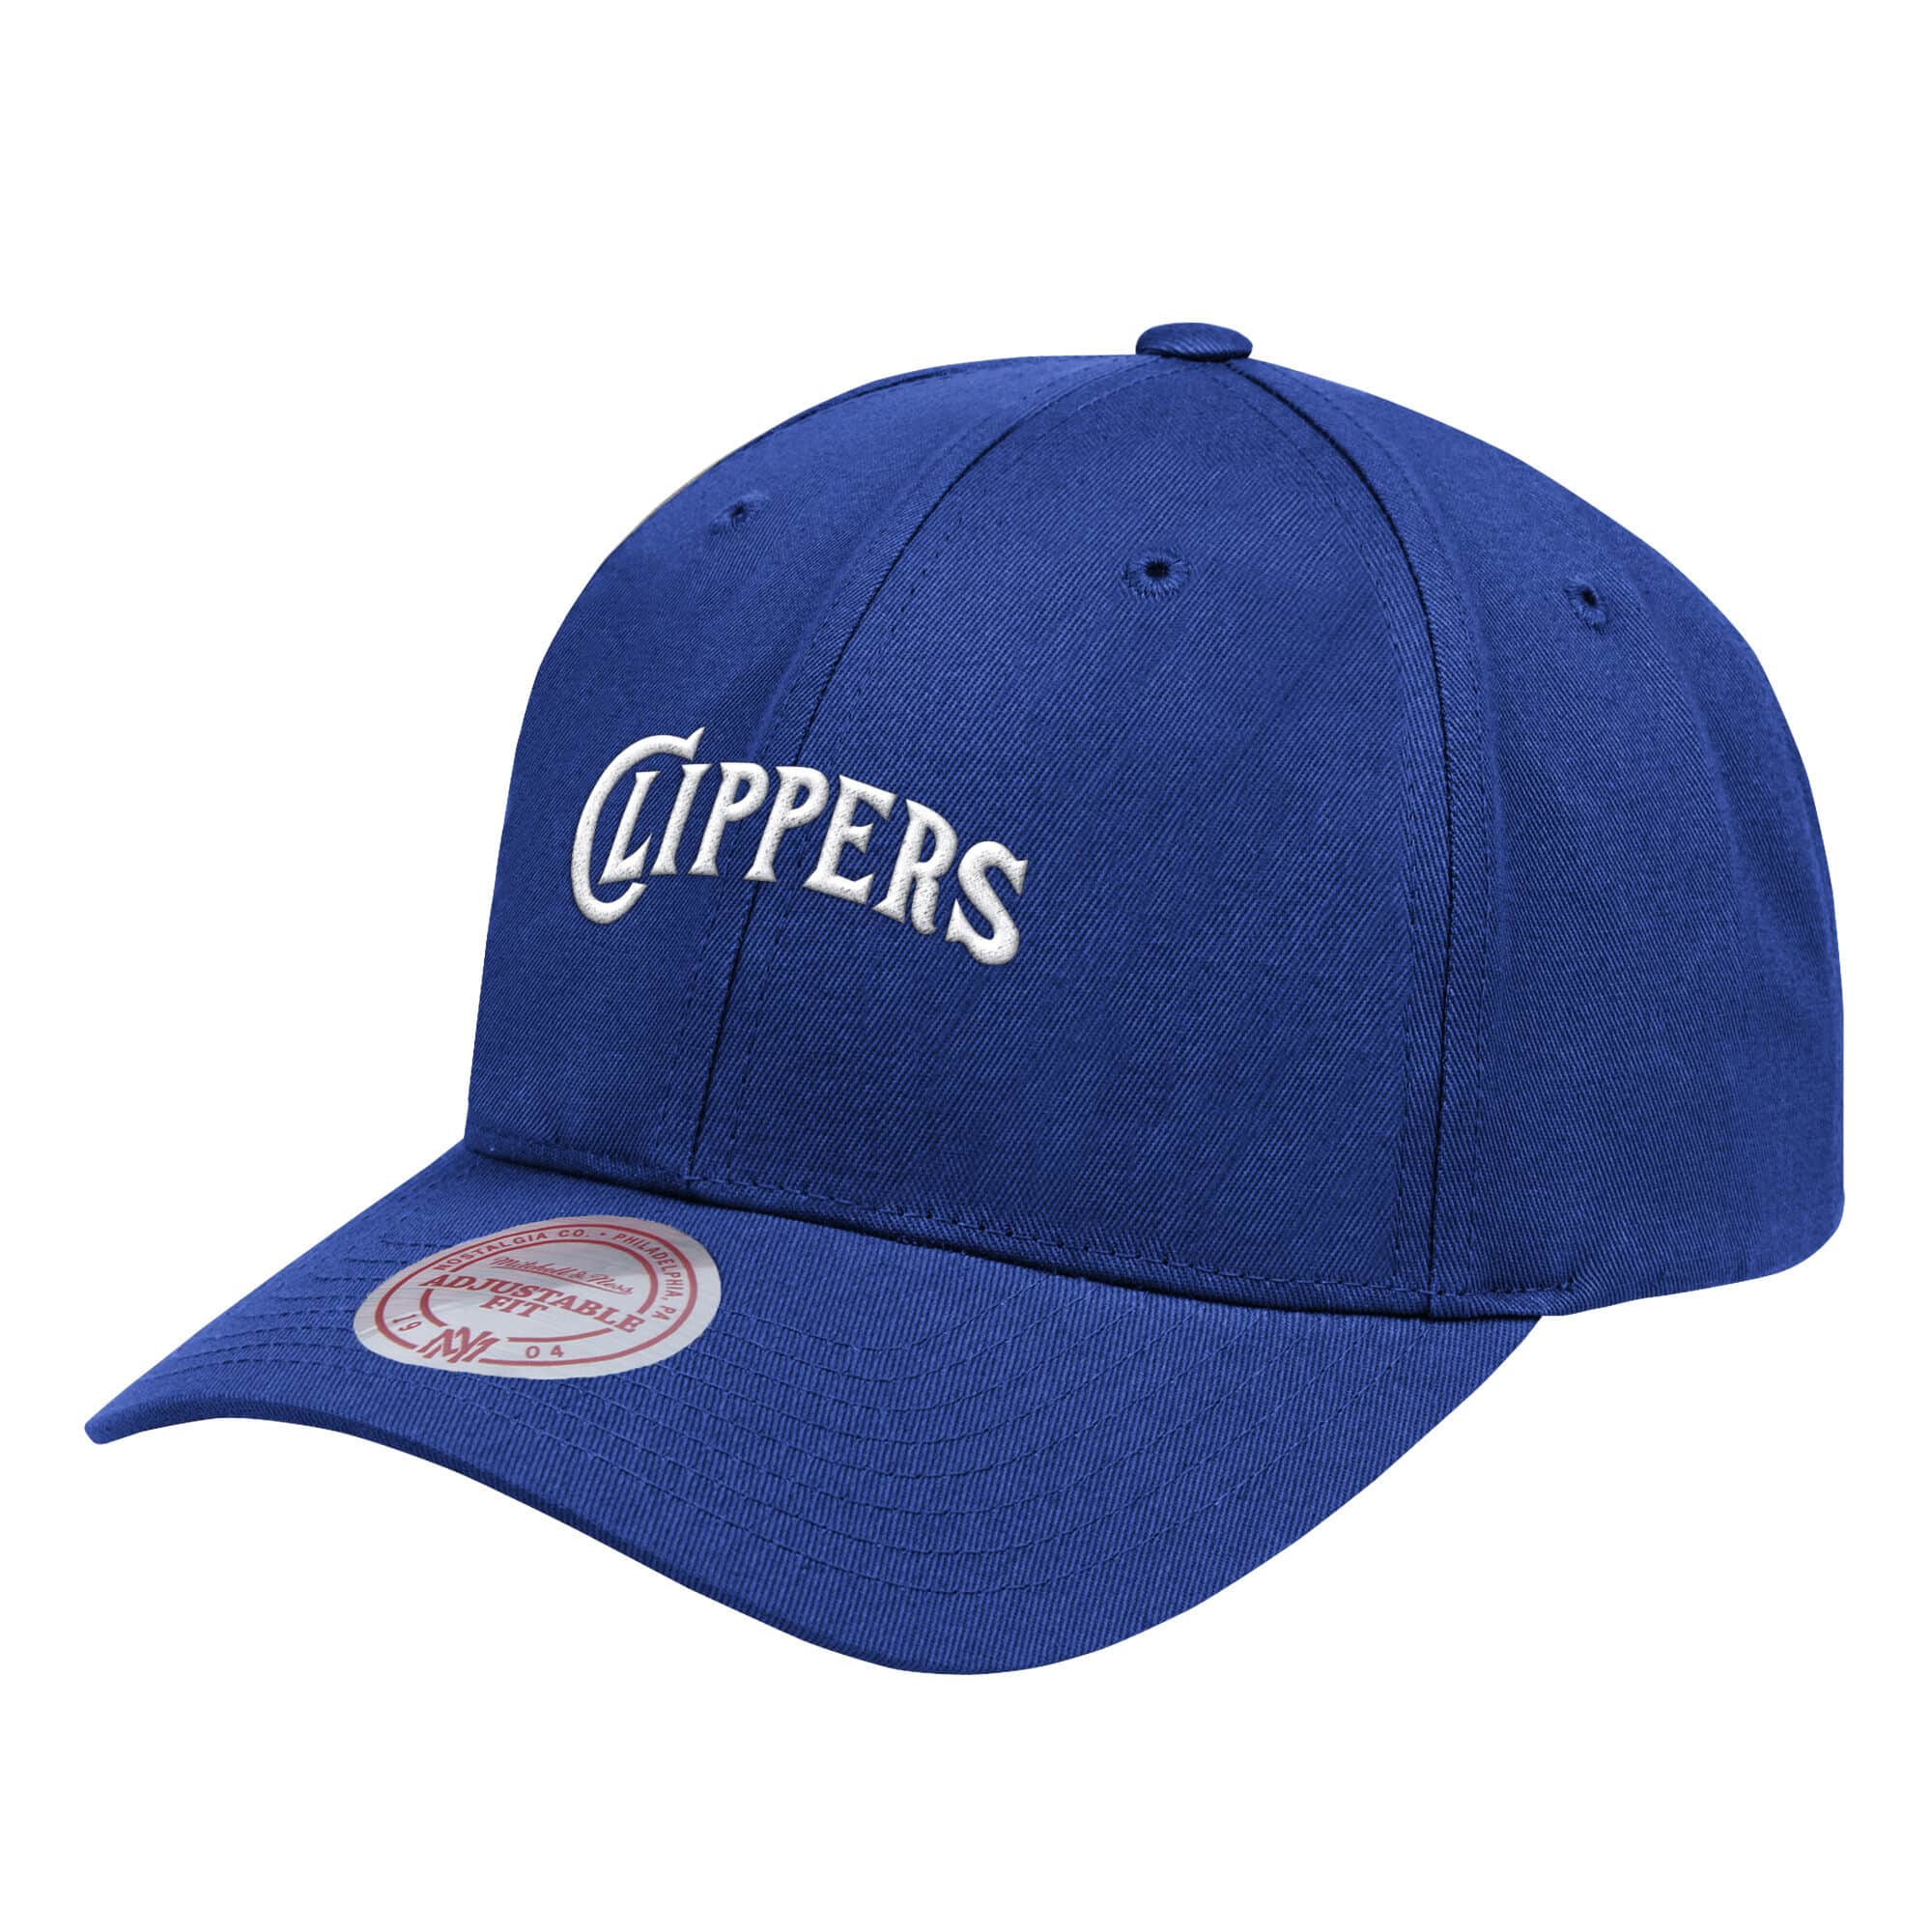 Aape x Mitchell amp; Ness San Diego Clippers Strapback Hat Royal Blue